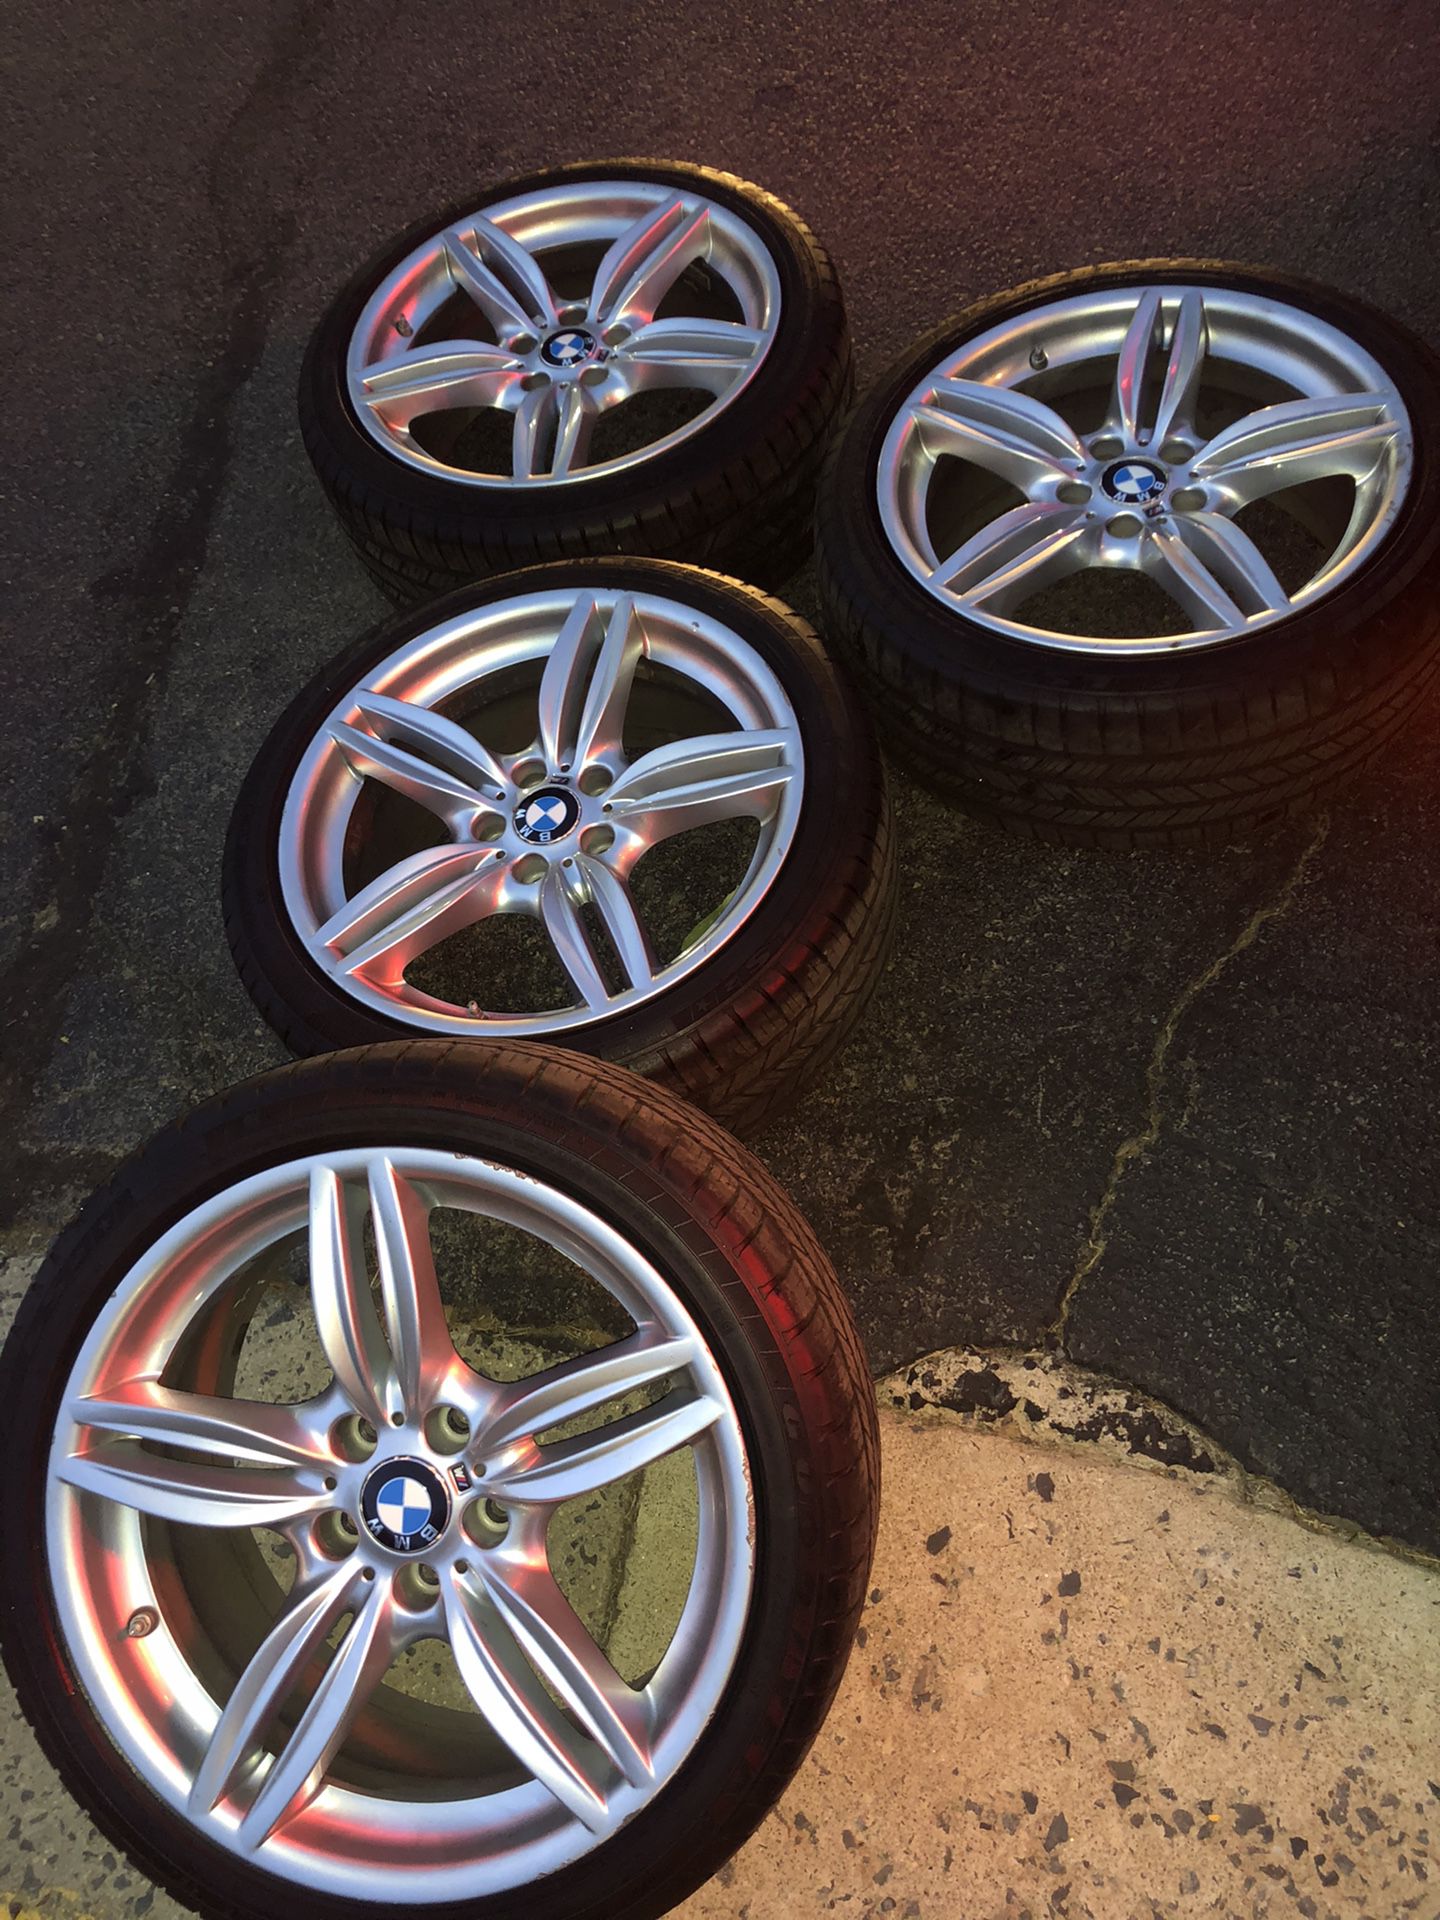 BMW 19” rims and tires